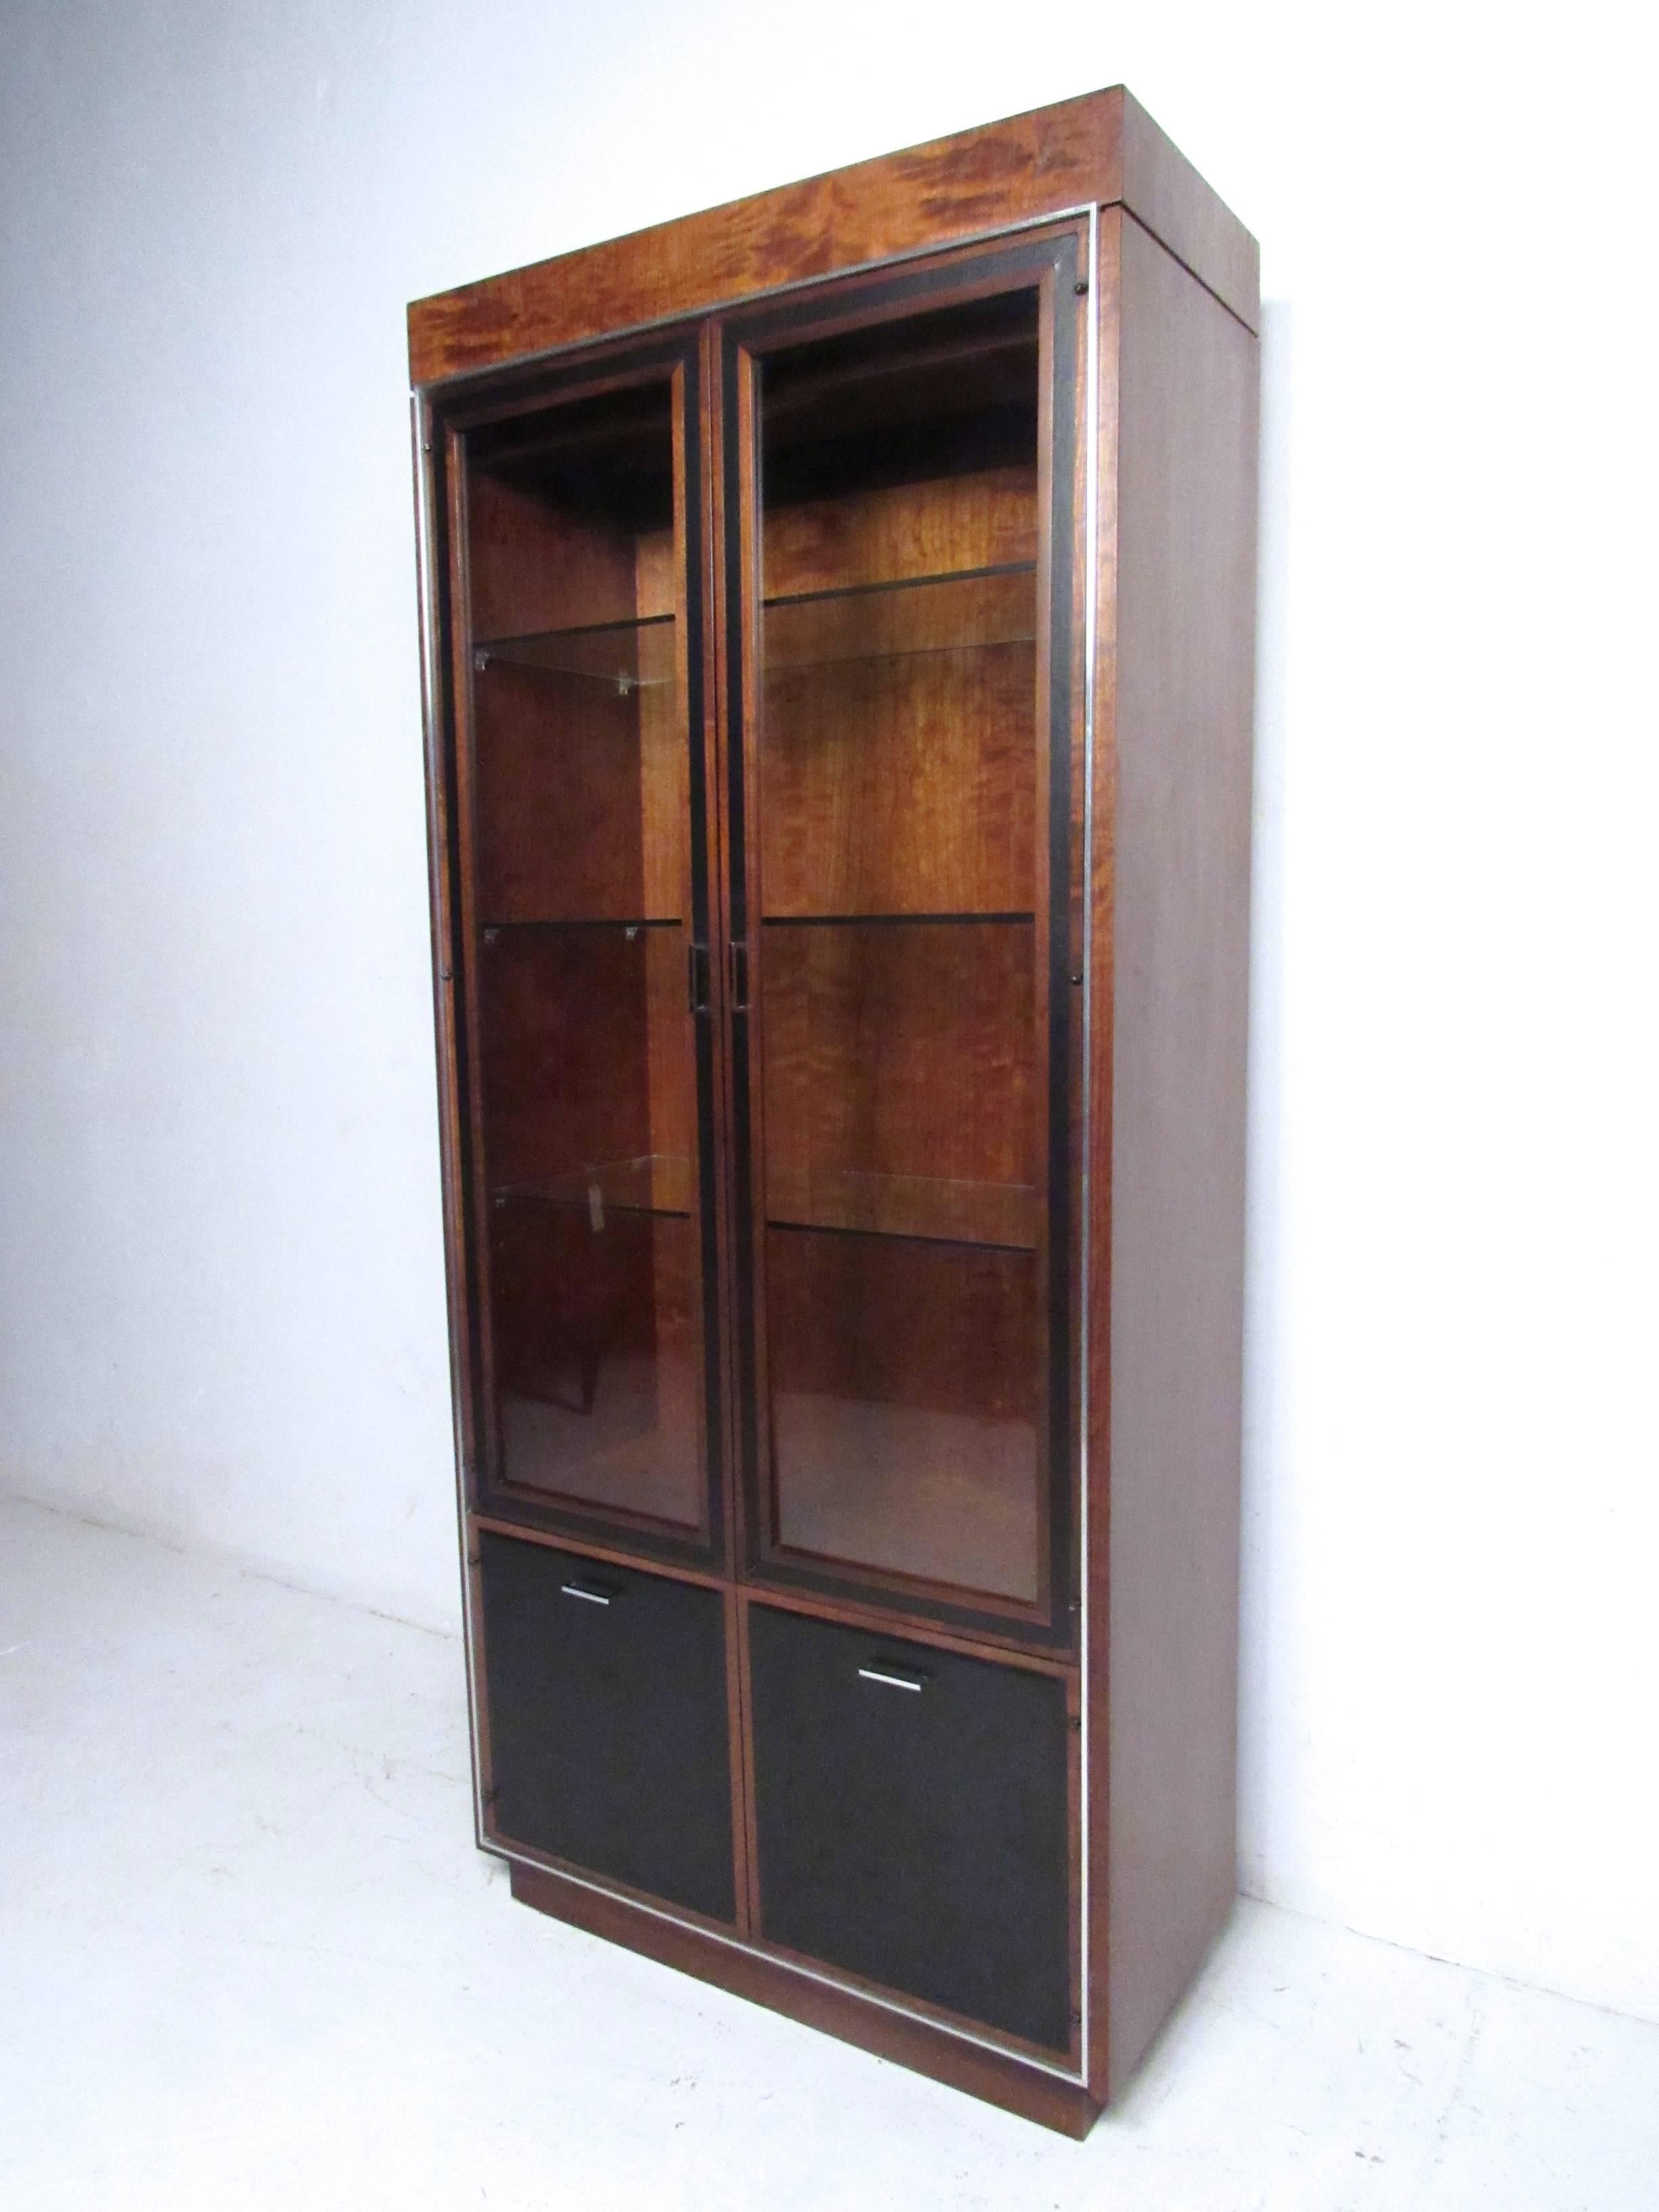 This beautiful Mid-Century display cabinet offers spacious storage behind oversized glass doors, with a lower shelved cabinet enclosed with leather front doors. Unique chrome trim, stylish John Stuart pulls and top light option make this piece a